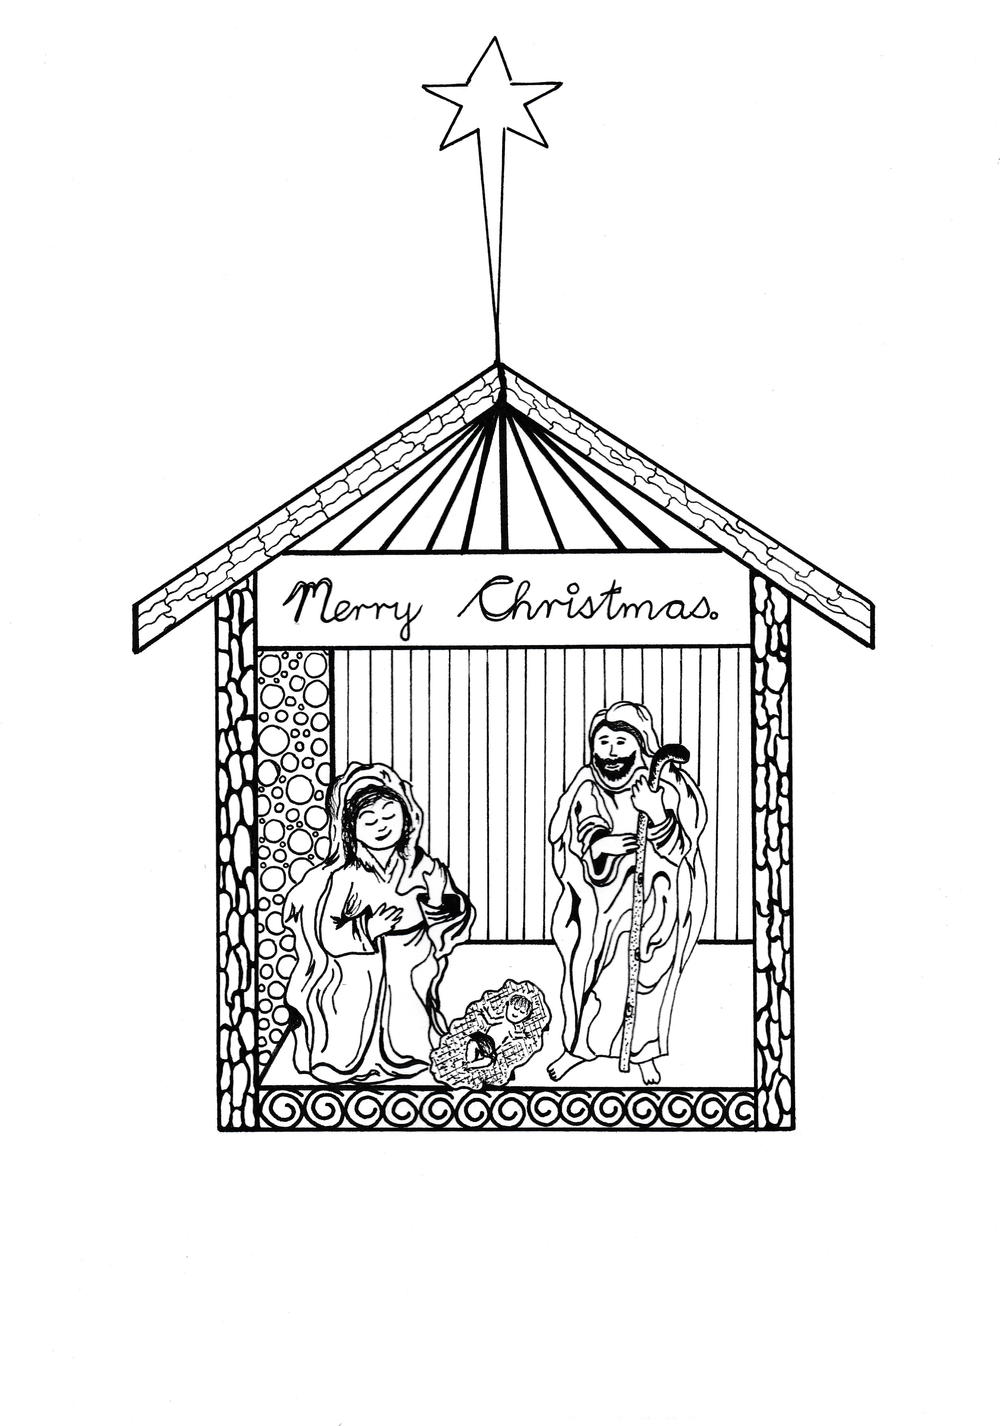 Download Free Printable Nativity Scene Coloring Pages | AllFreeChristmasCrafts.com